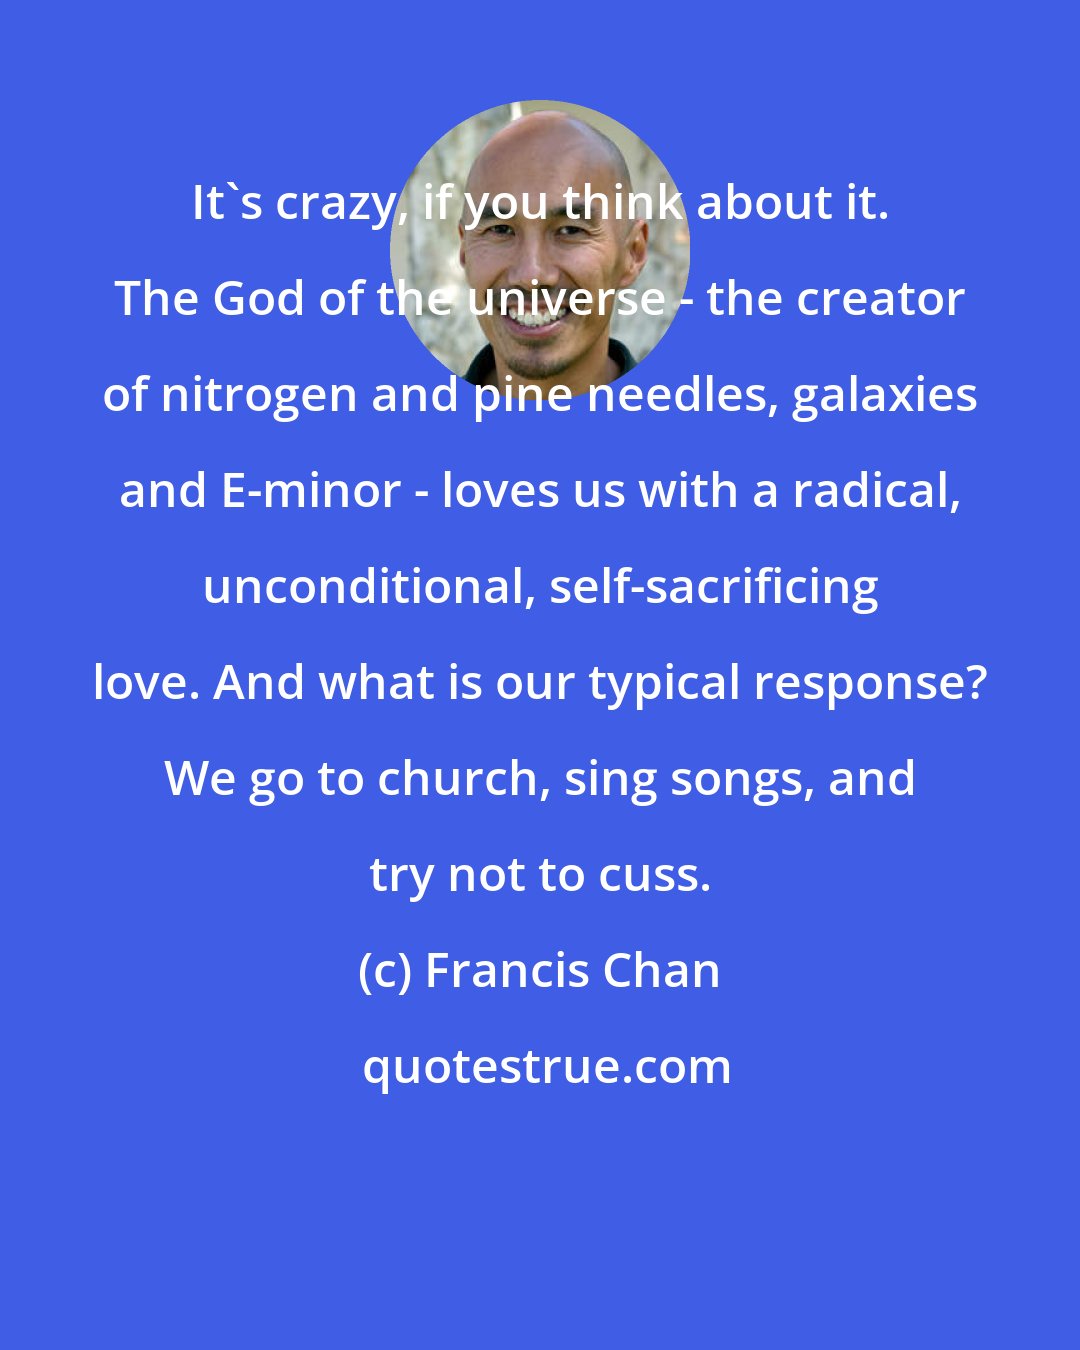 Francis Chan: It's crazy, if you think about it. The God of the universe - the creator of nitrogen and pine needles, galaxies and E-minor - loves us with a radical, unconditional, self-sacrificing love. And what is our typical response? We go to church, sing songs, and try not to cuss.